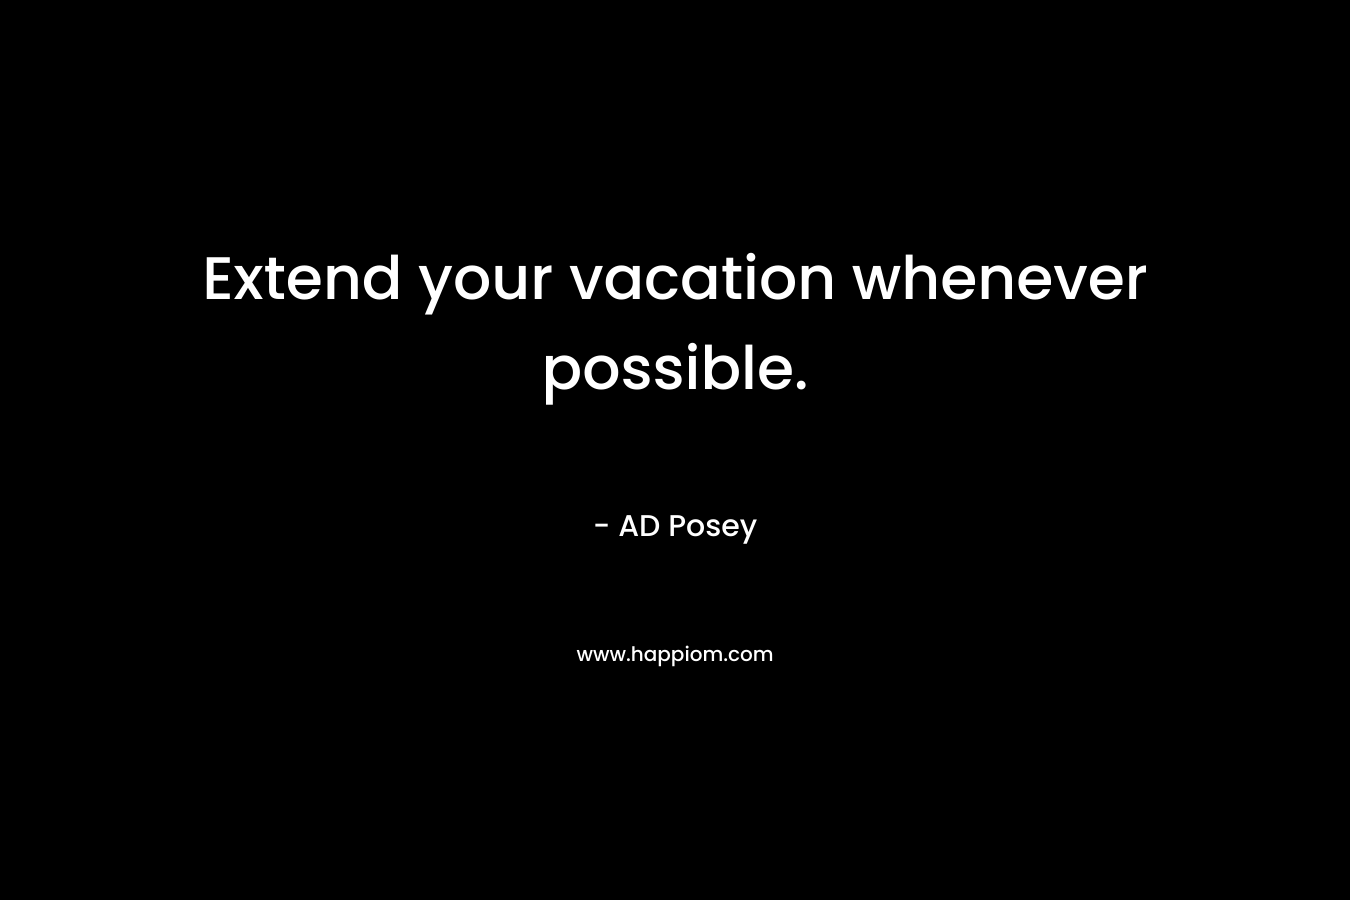 Extend your vacation whenever possible.